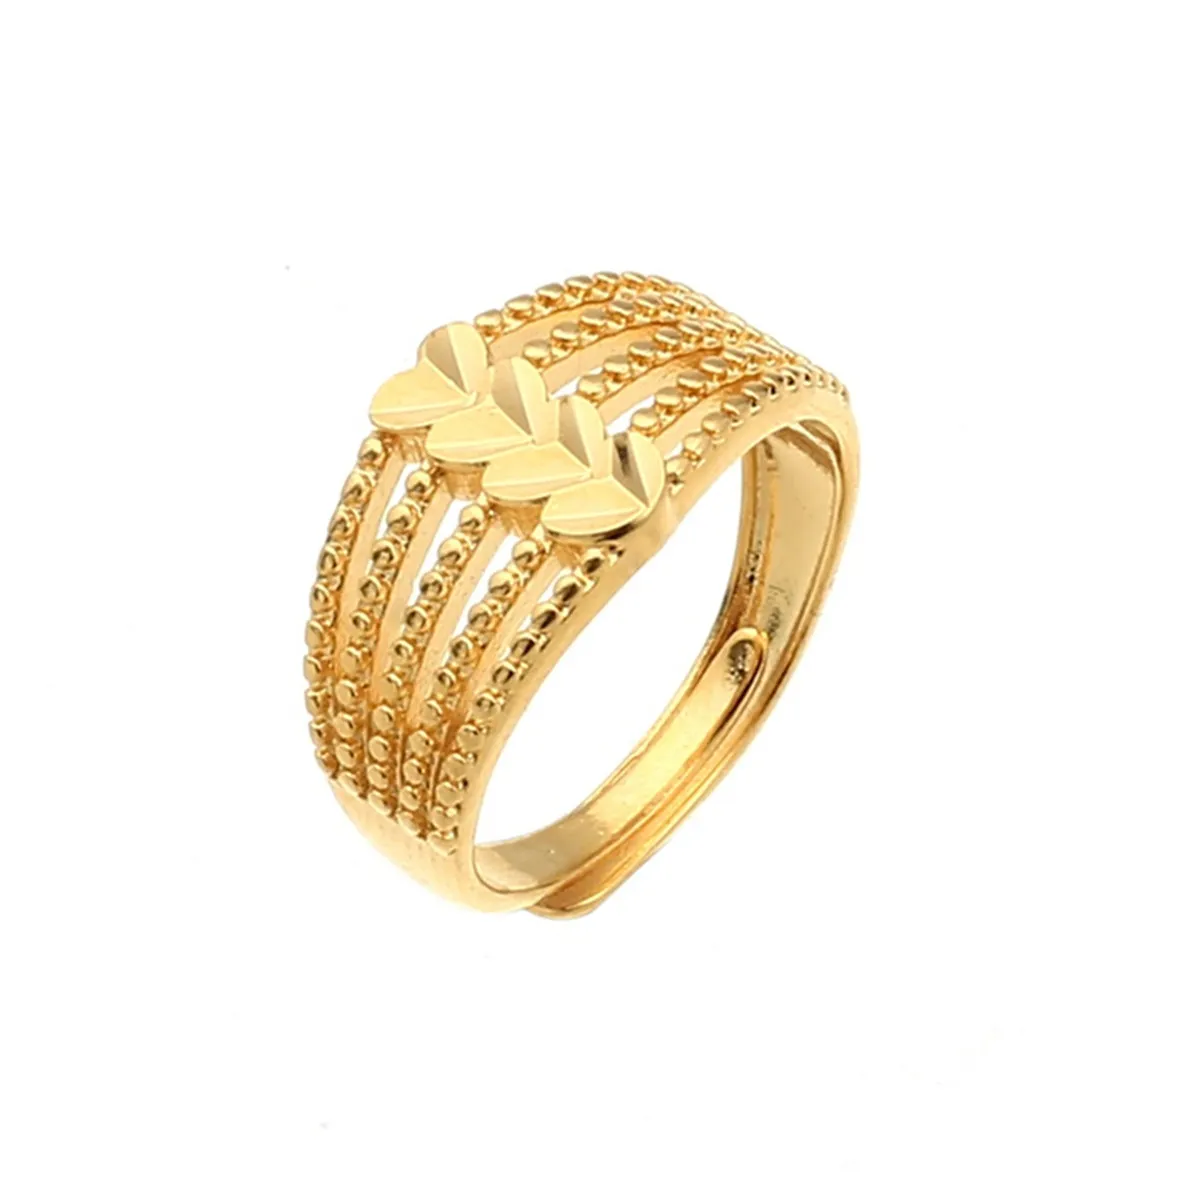 Gold Wedding Bands: Gold Wedding Rings for Women